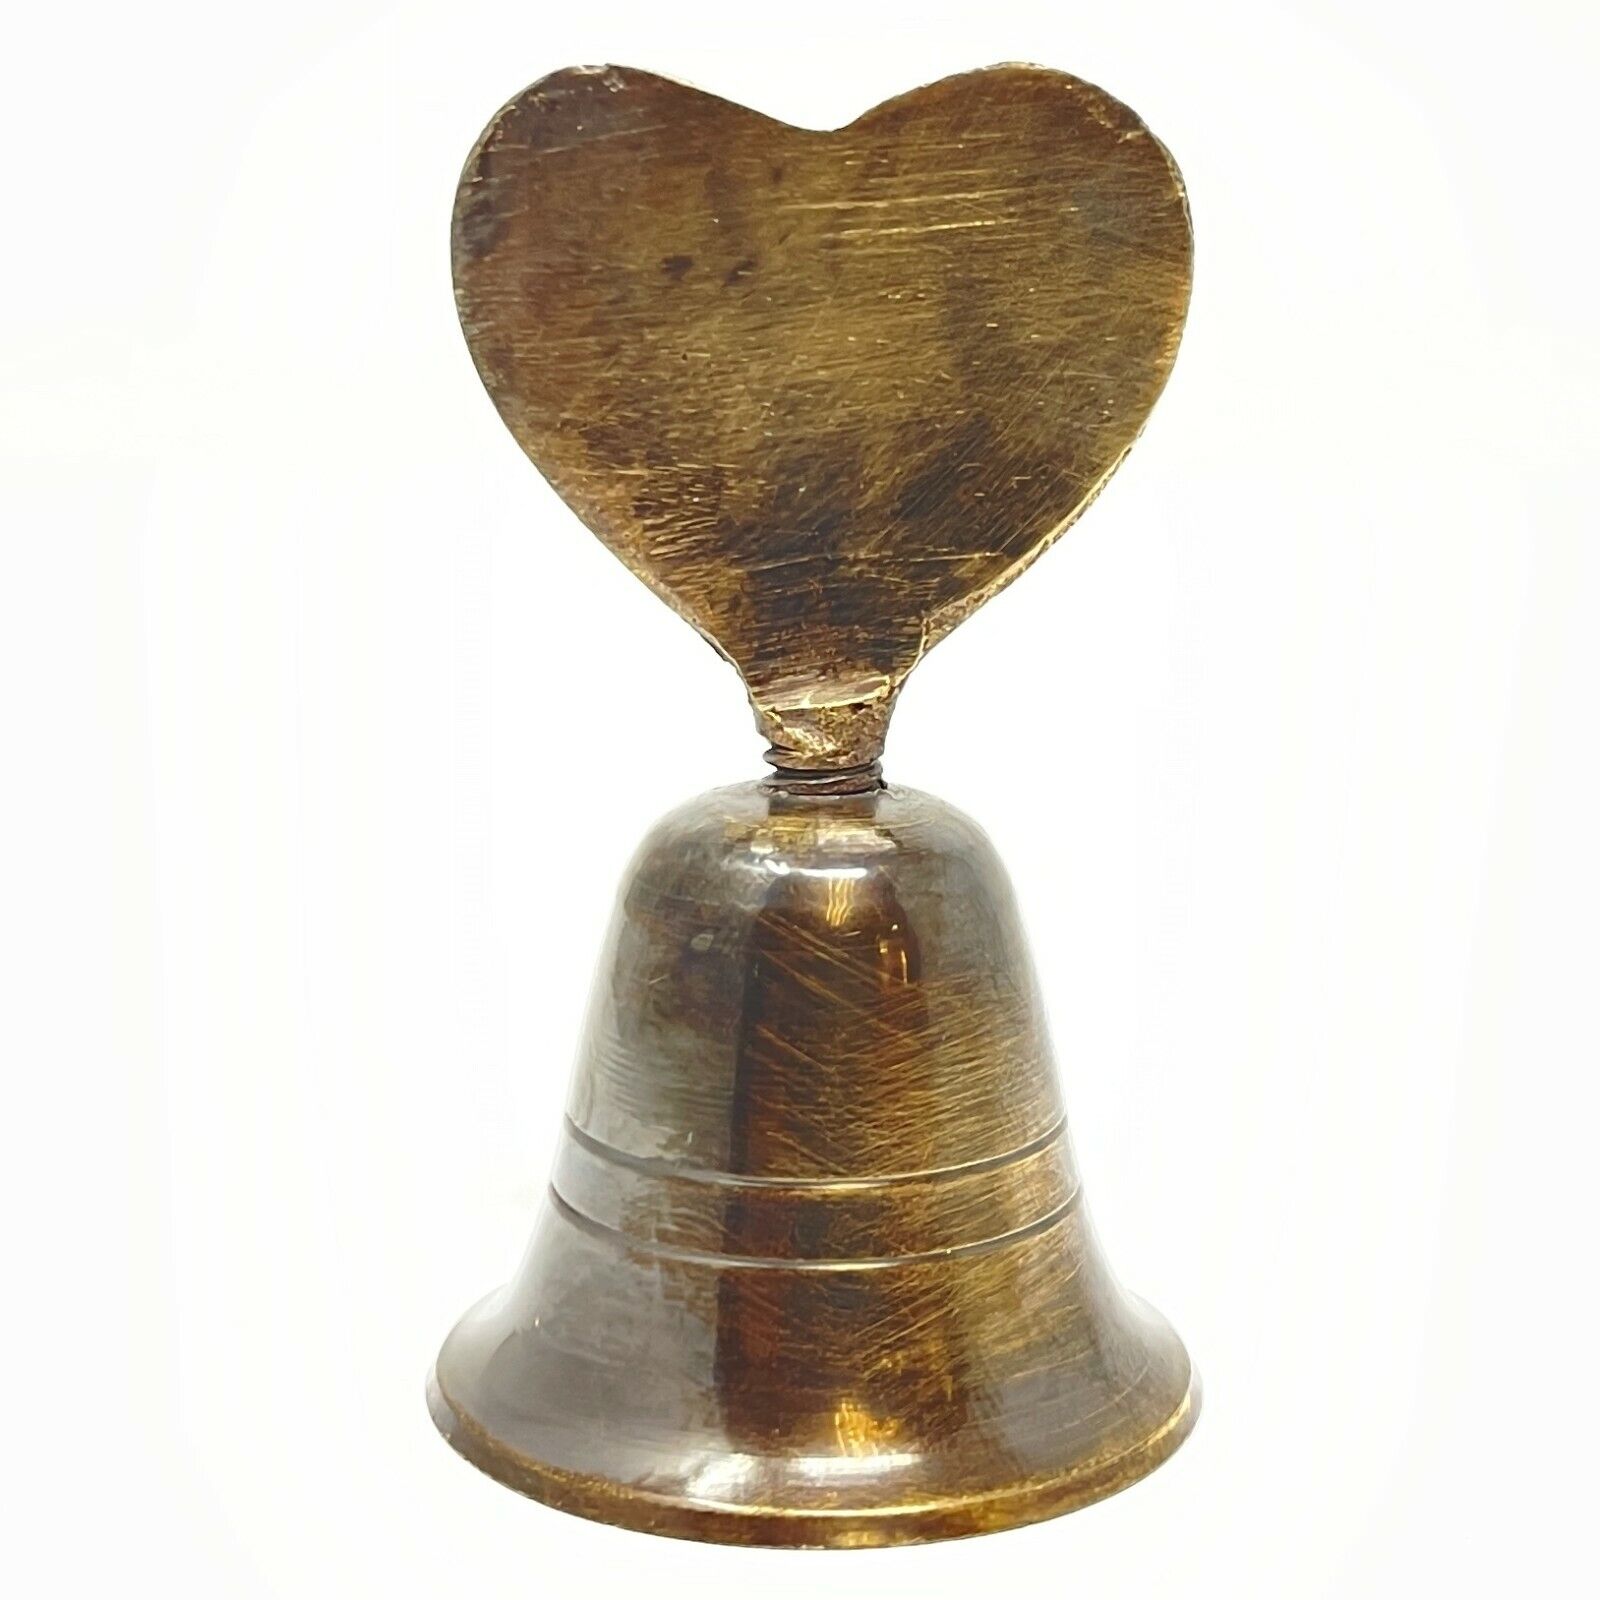 Heart Bell, Brass Bell With Heart Shaped Handle, Vintage Antique Finish